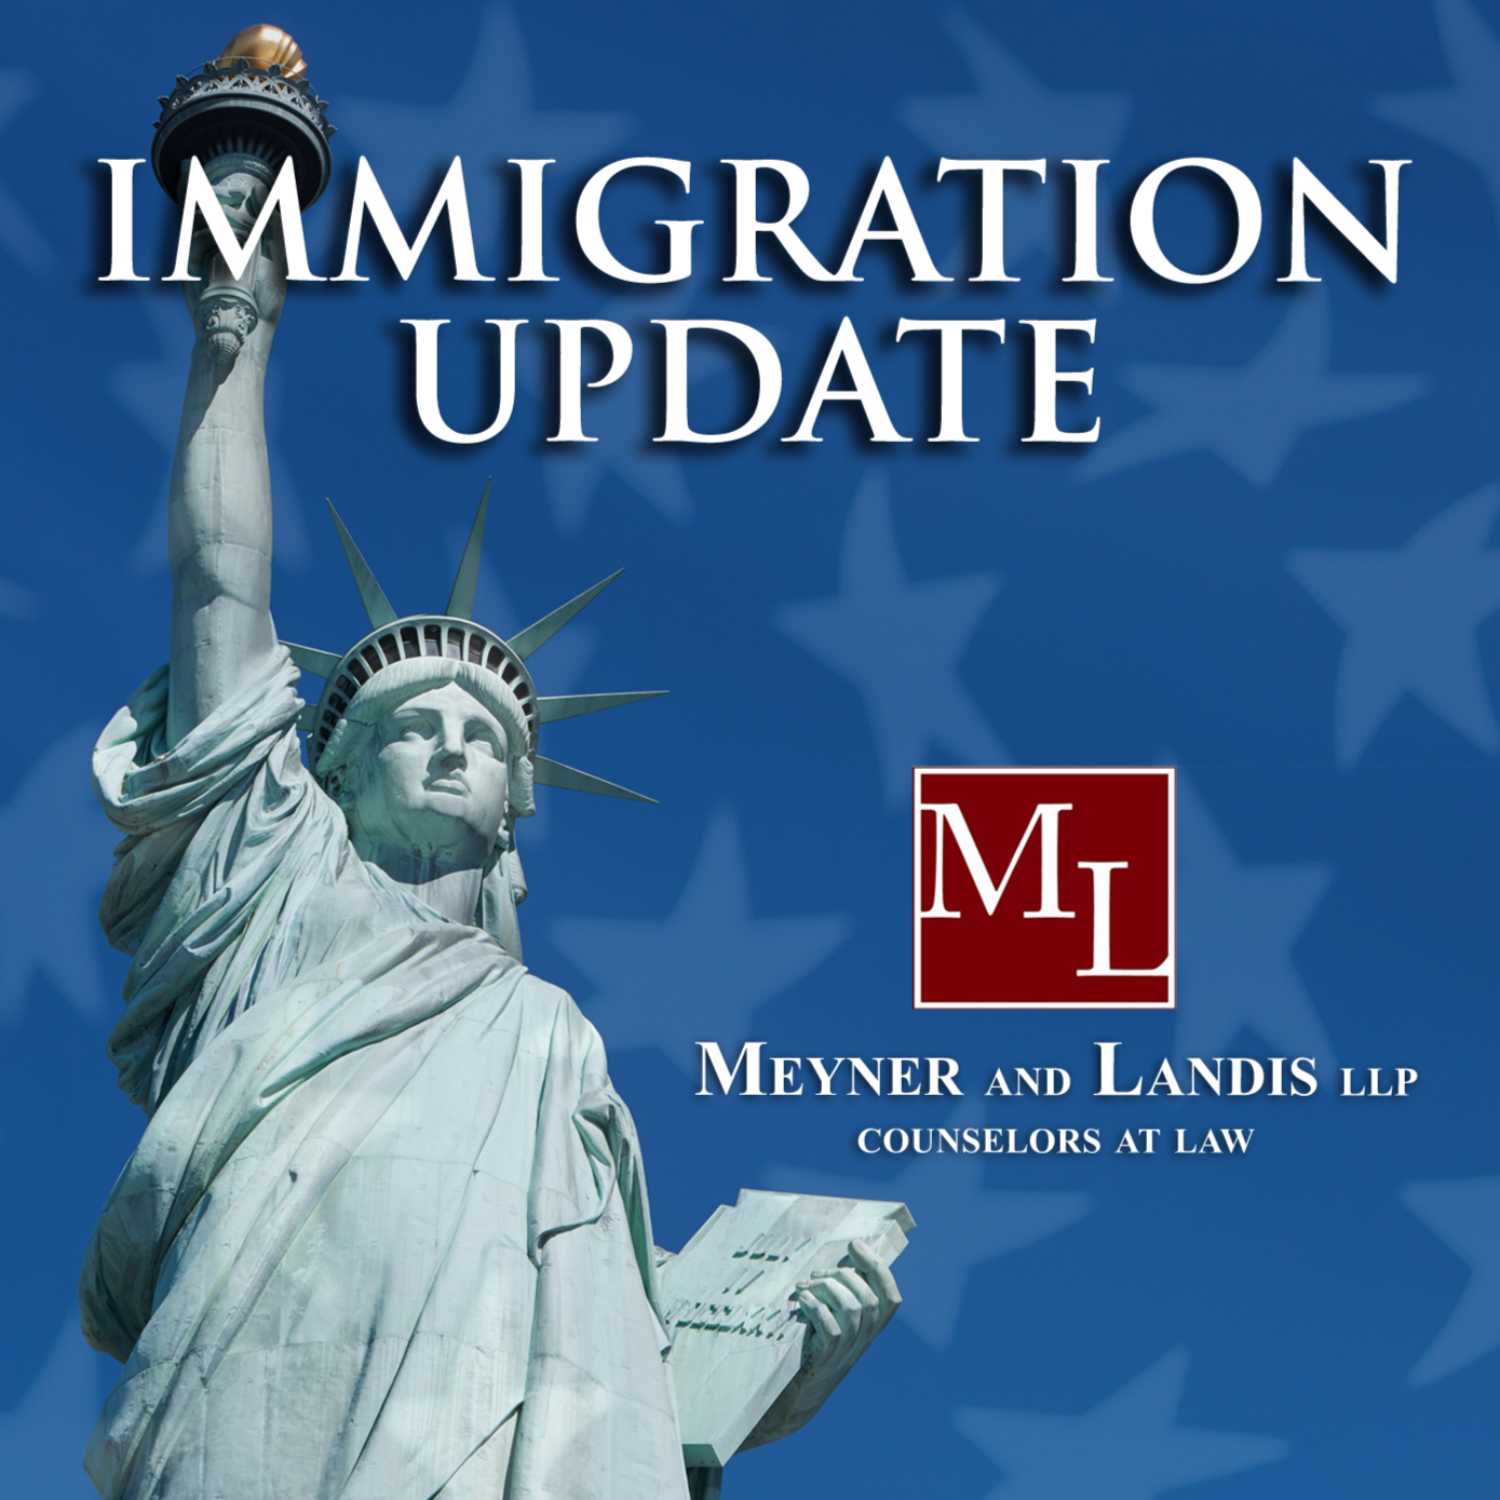 June 13, 2021: Good News from the 2021 AILA Immigration Law Virtual Conference